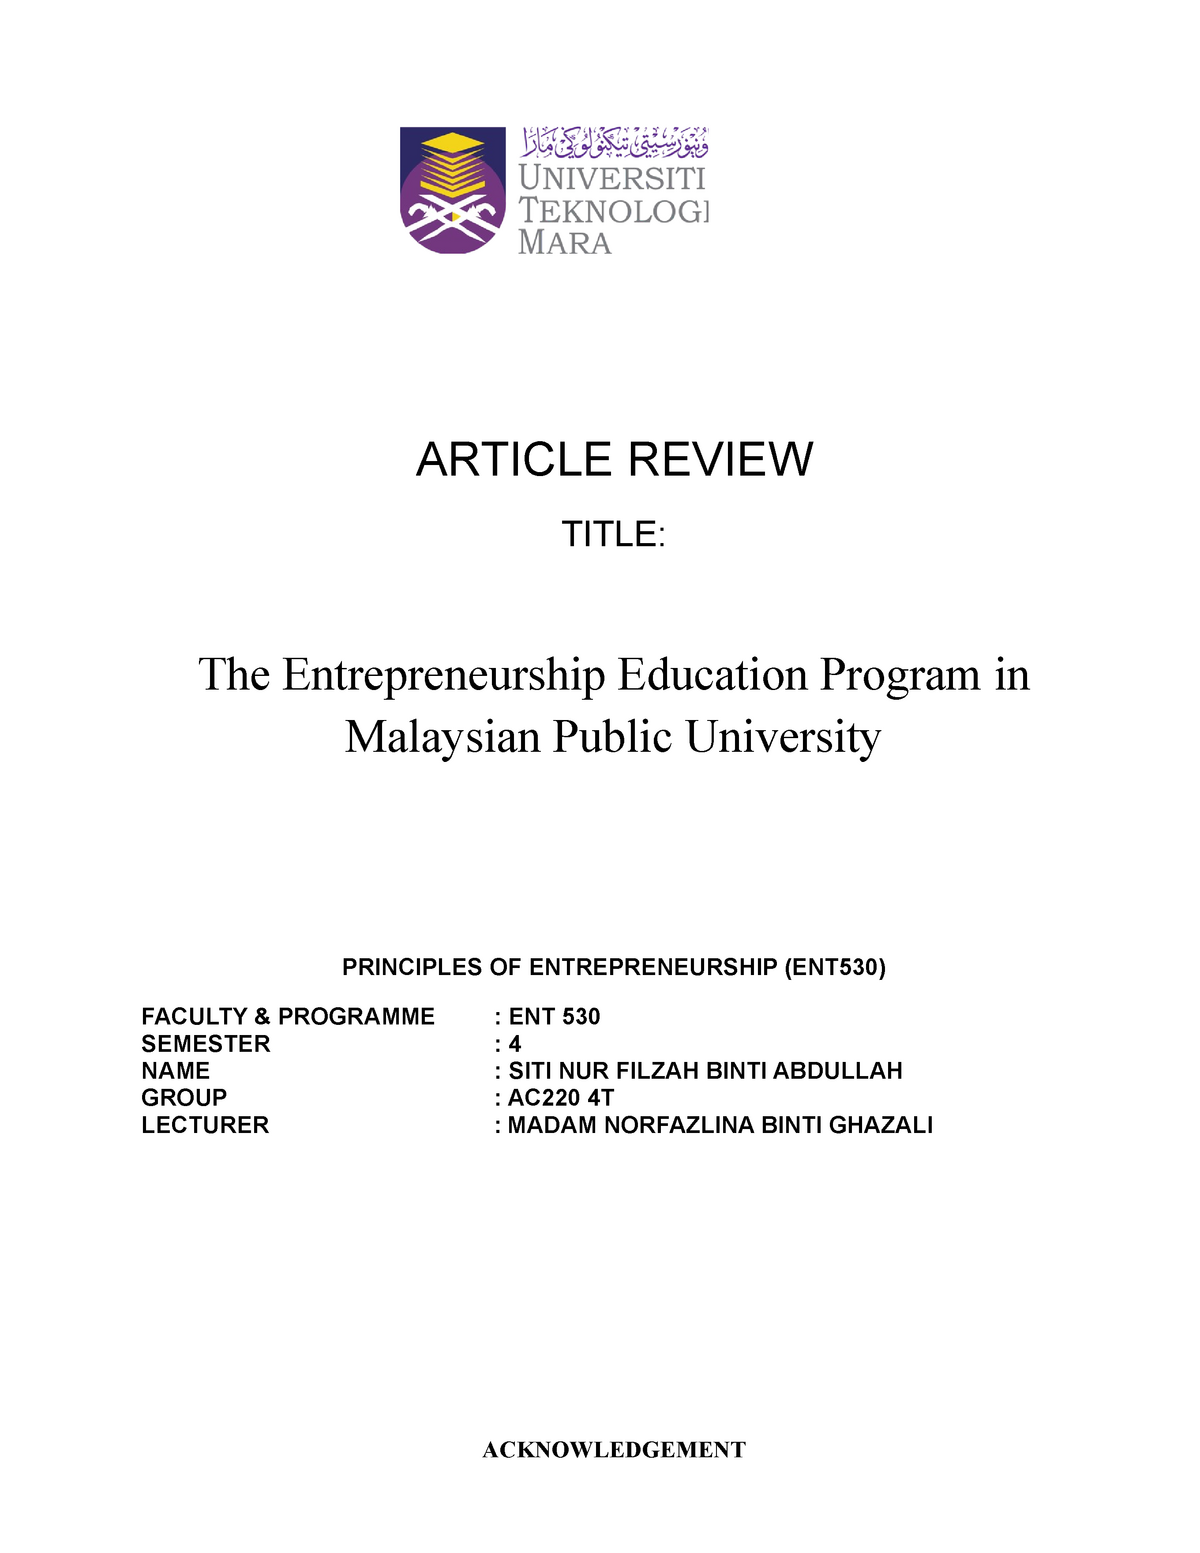 contoh assignment article review uitm